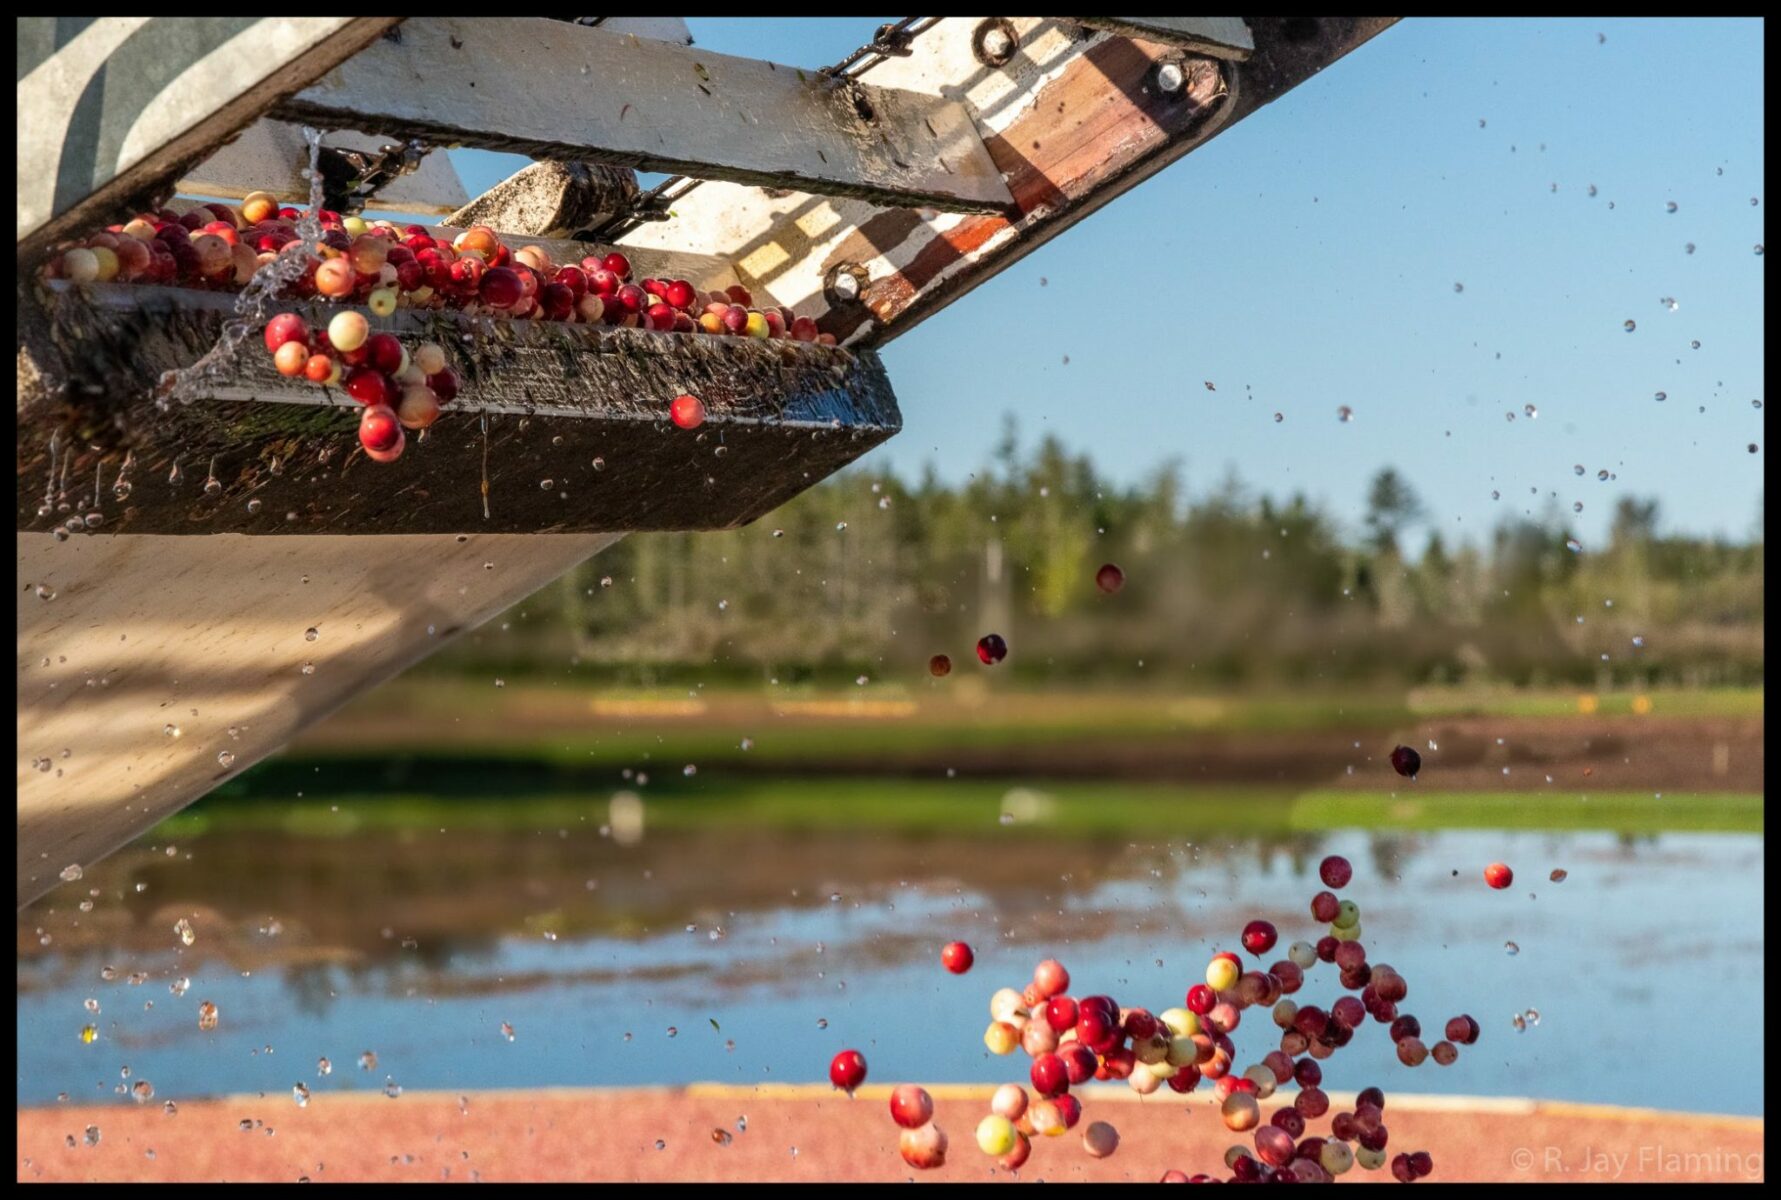 farm equipment drops bright red cranberries into a crate for transport to market. In the background a flooded Washington cranberry bog is seen on a sunny day